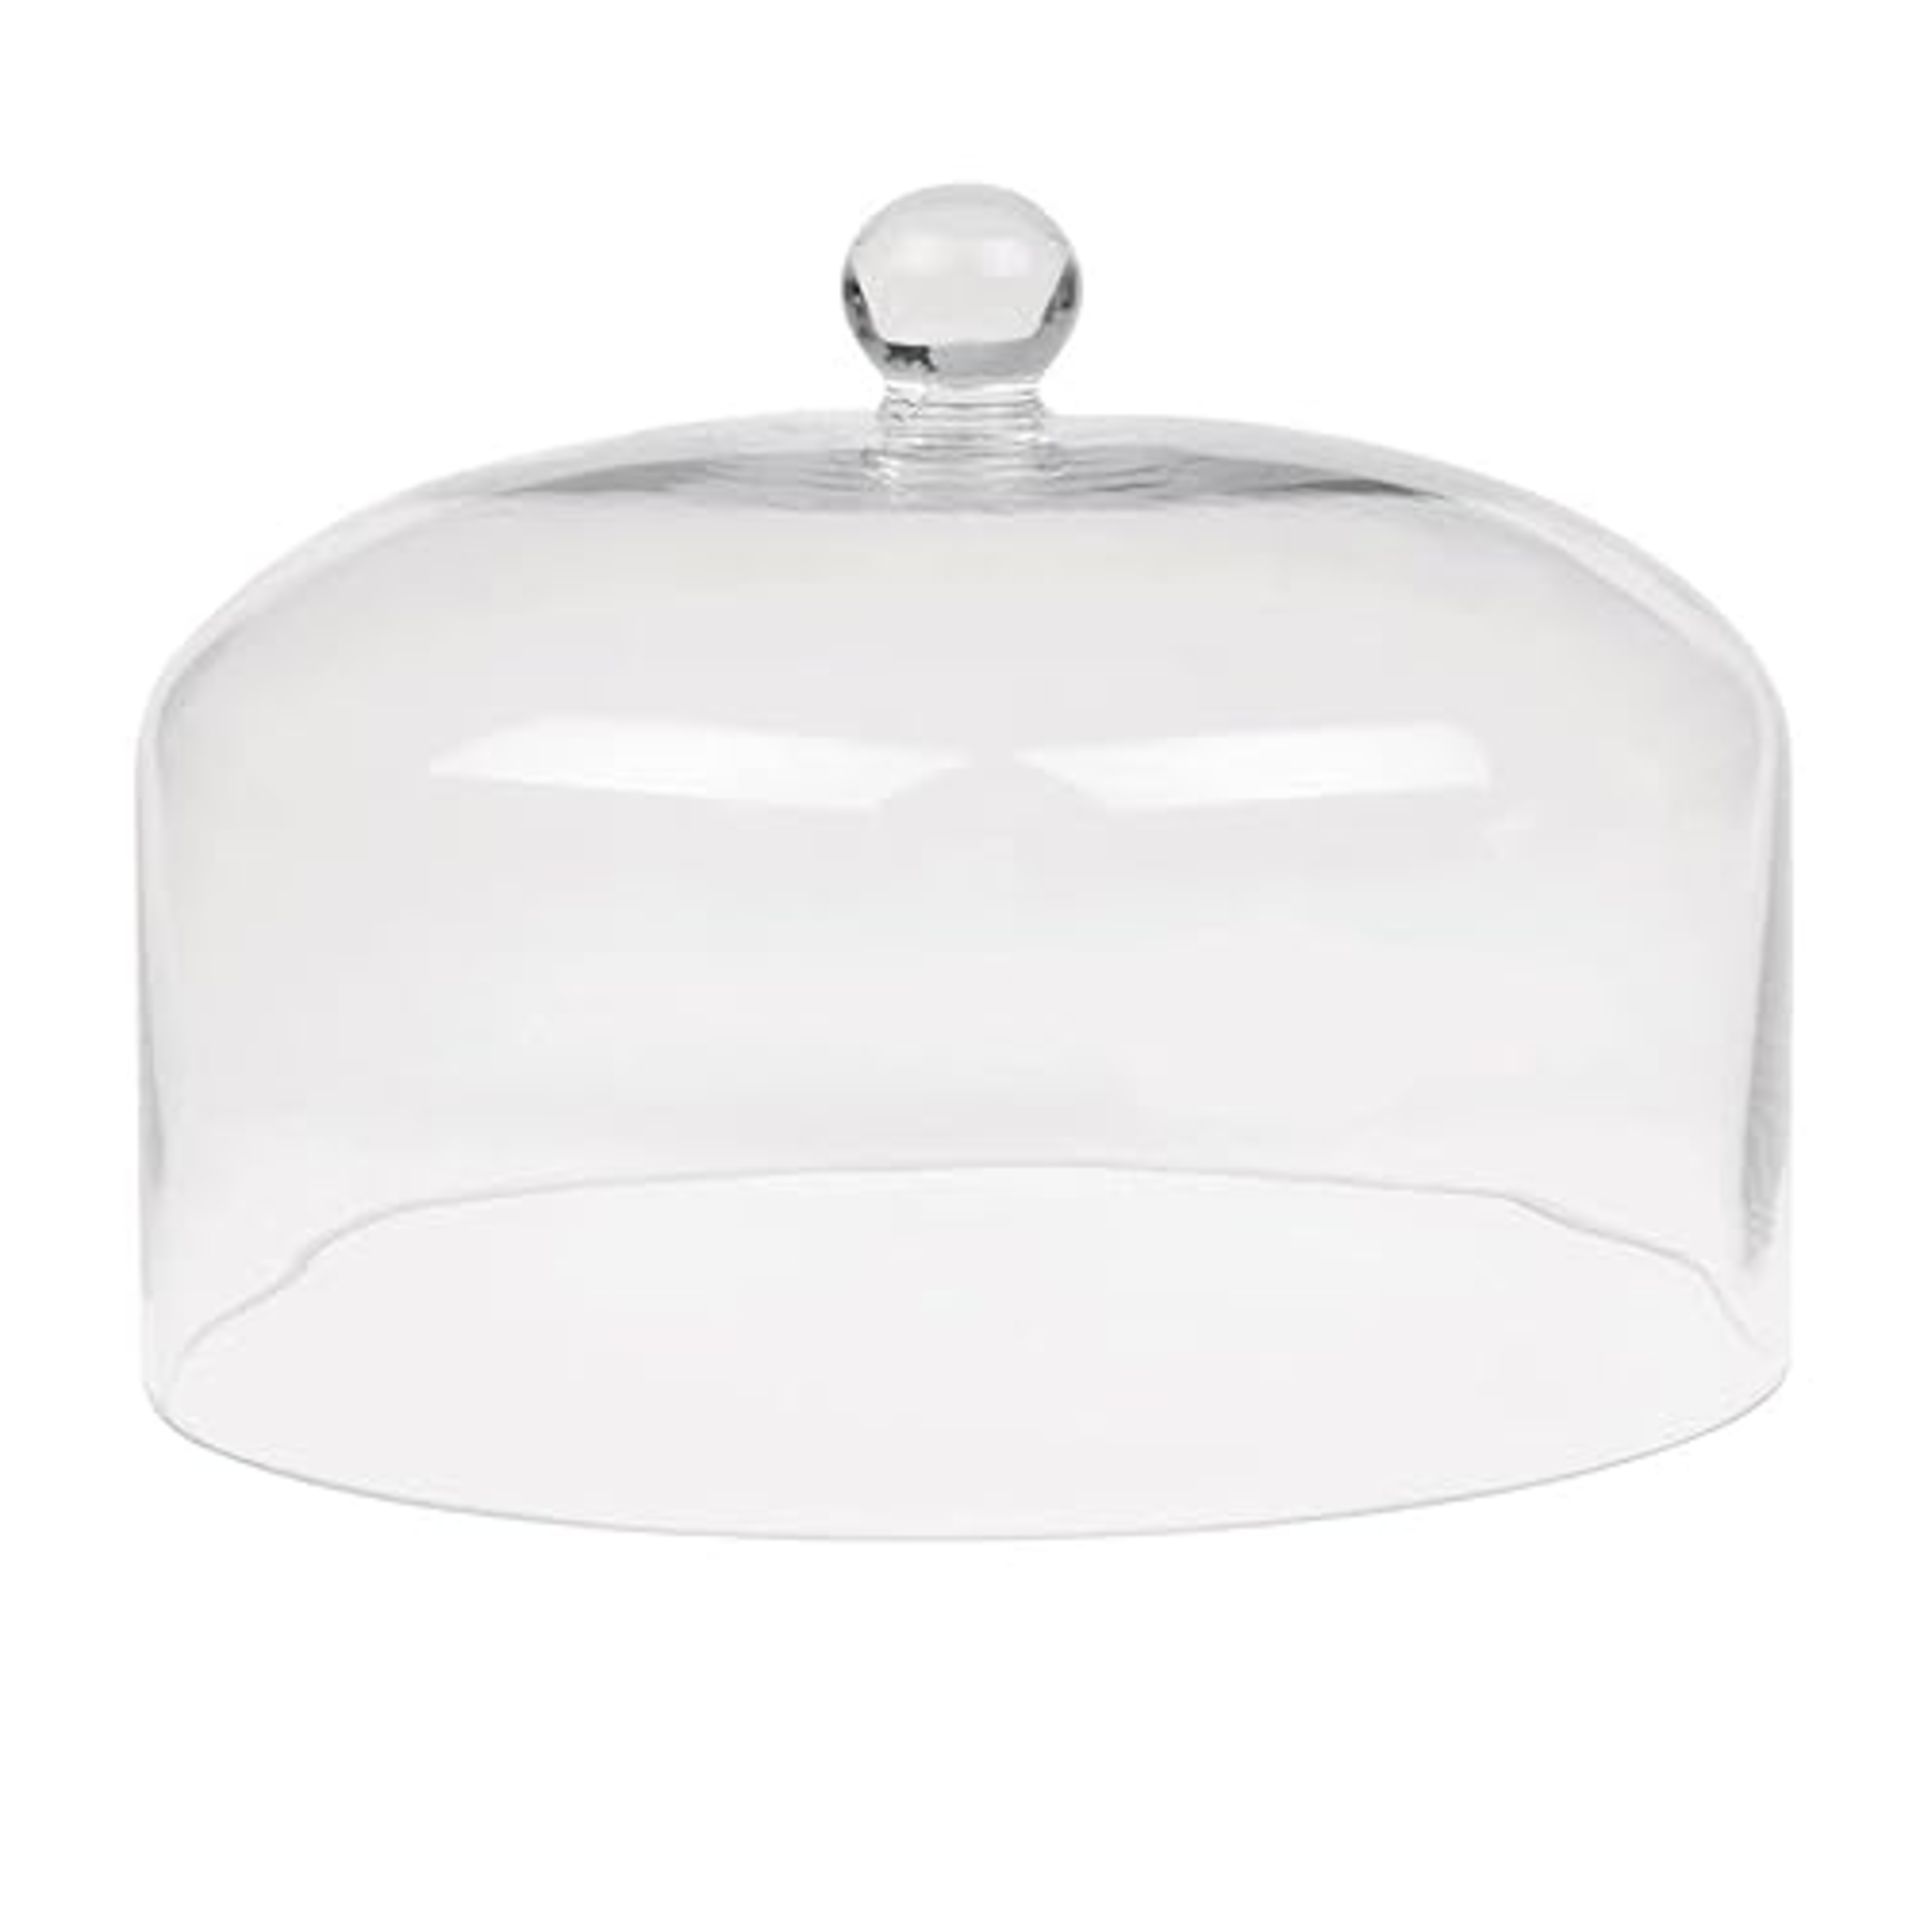 Olympia Glass Cake Stand Dome Lid, 285(Dia) X 200(H)Mm, High Clarity Clear Glass, Protects Homemad..